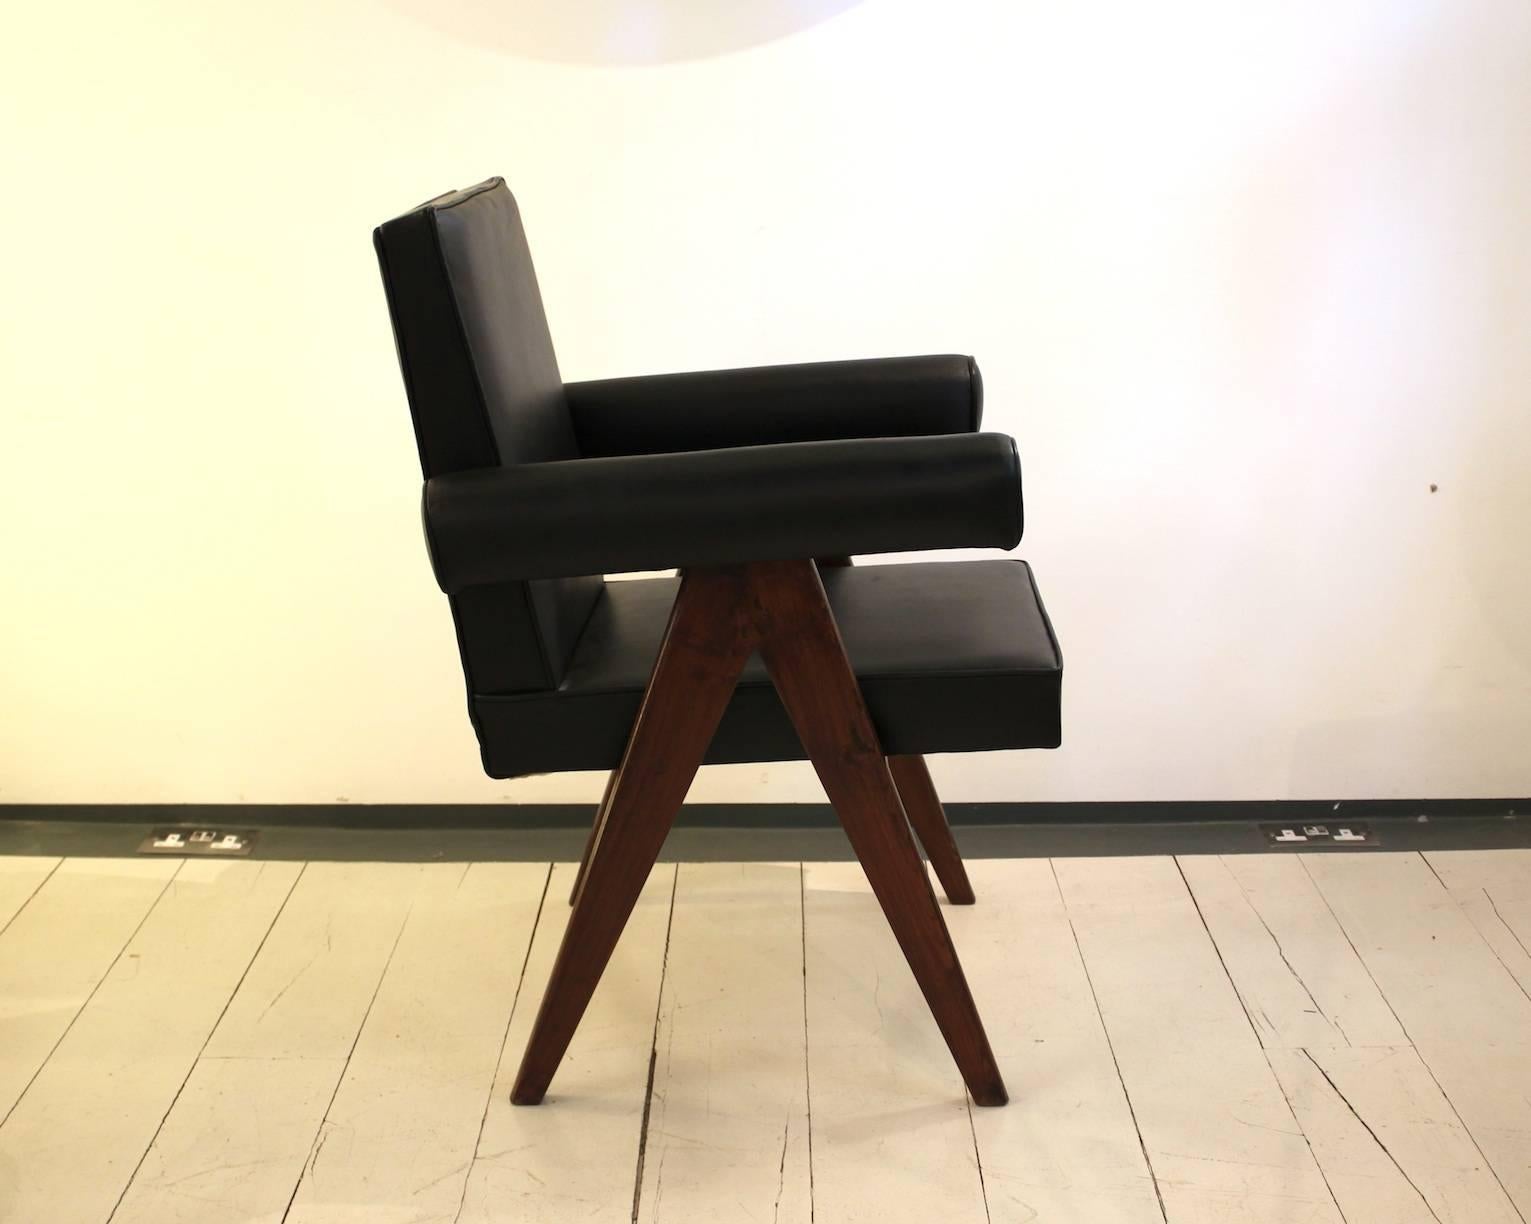 Pair of Committee armchairs designed by Pierre Jeanneret for an administrative building in Chandigarh, India.

Model no. PJ-SI-30-A.

Teak and leather.